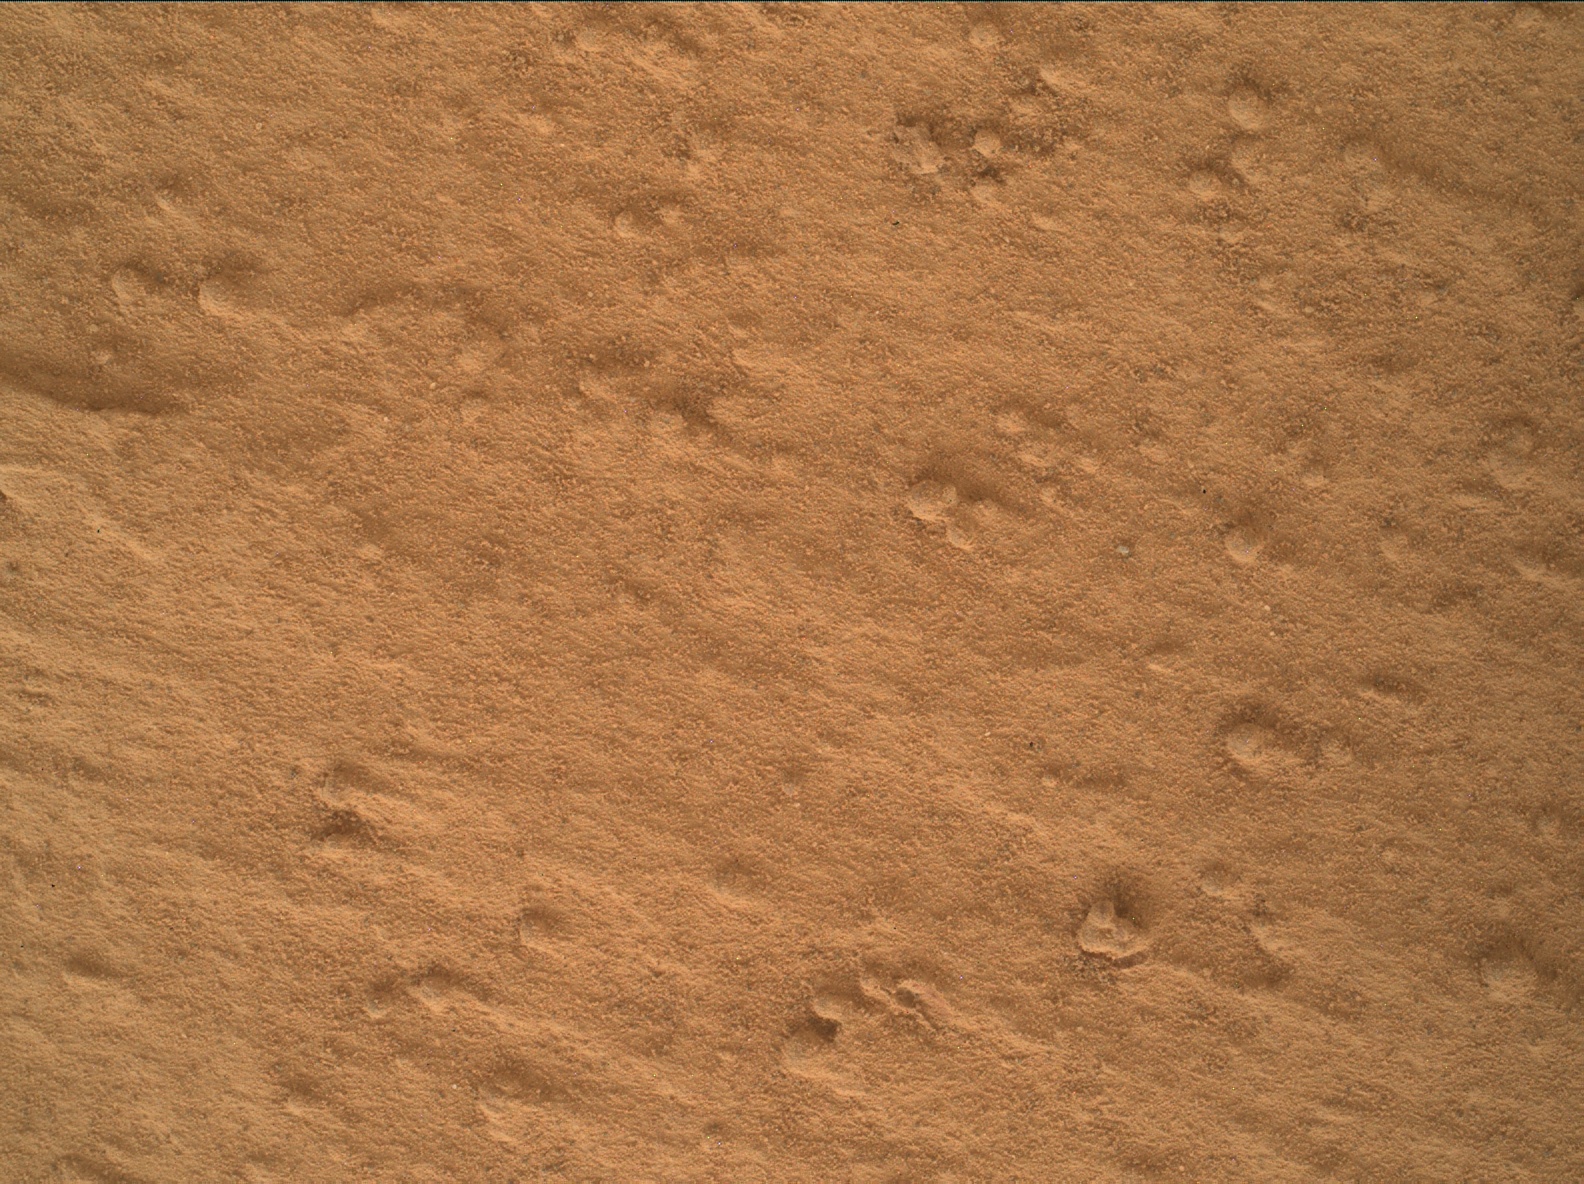 Nasa's Mars rover Curiosity acquired this image using its Mars Hand Lens Imager (MAHLI) on Sol 3471